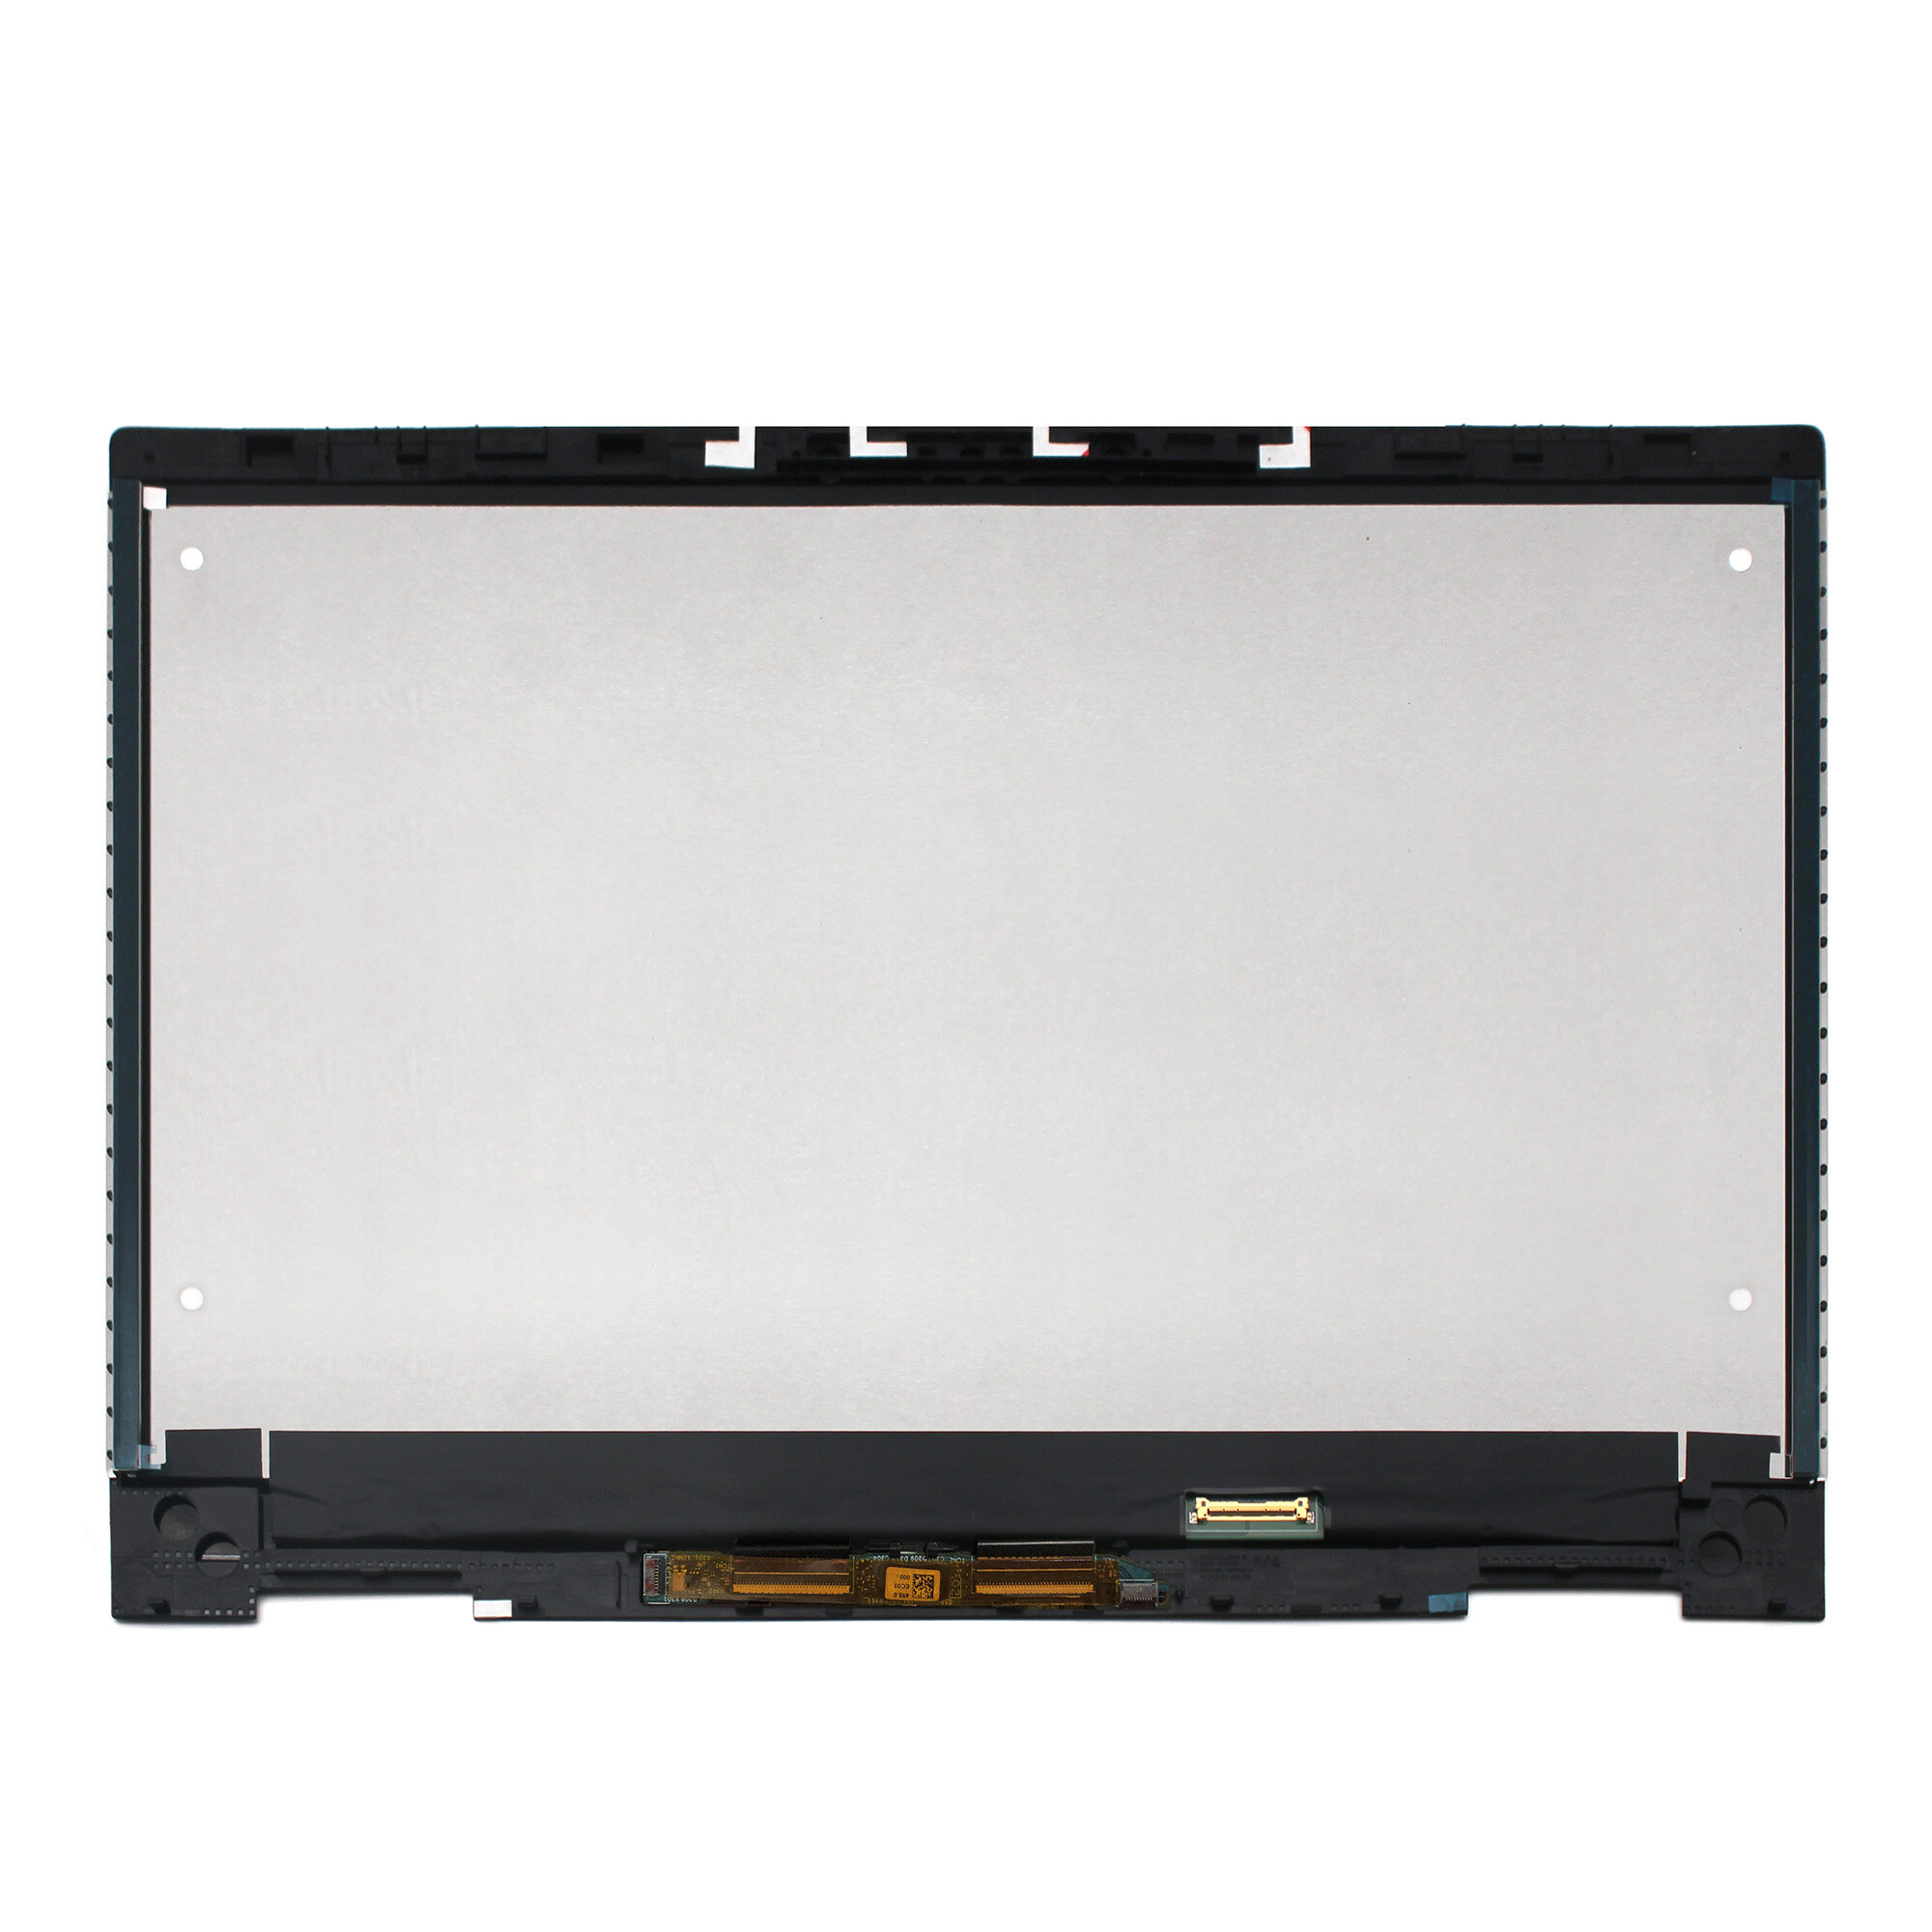 Kreplacement 13.3\" Laptop LED LCD Touch Screen Assembly With Bezel For HP Evny x360 13-ag series 1920x1080